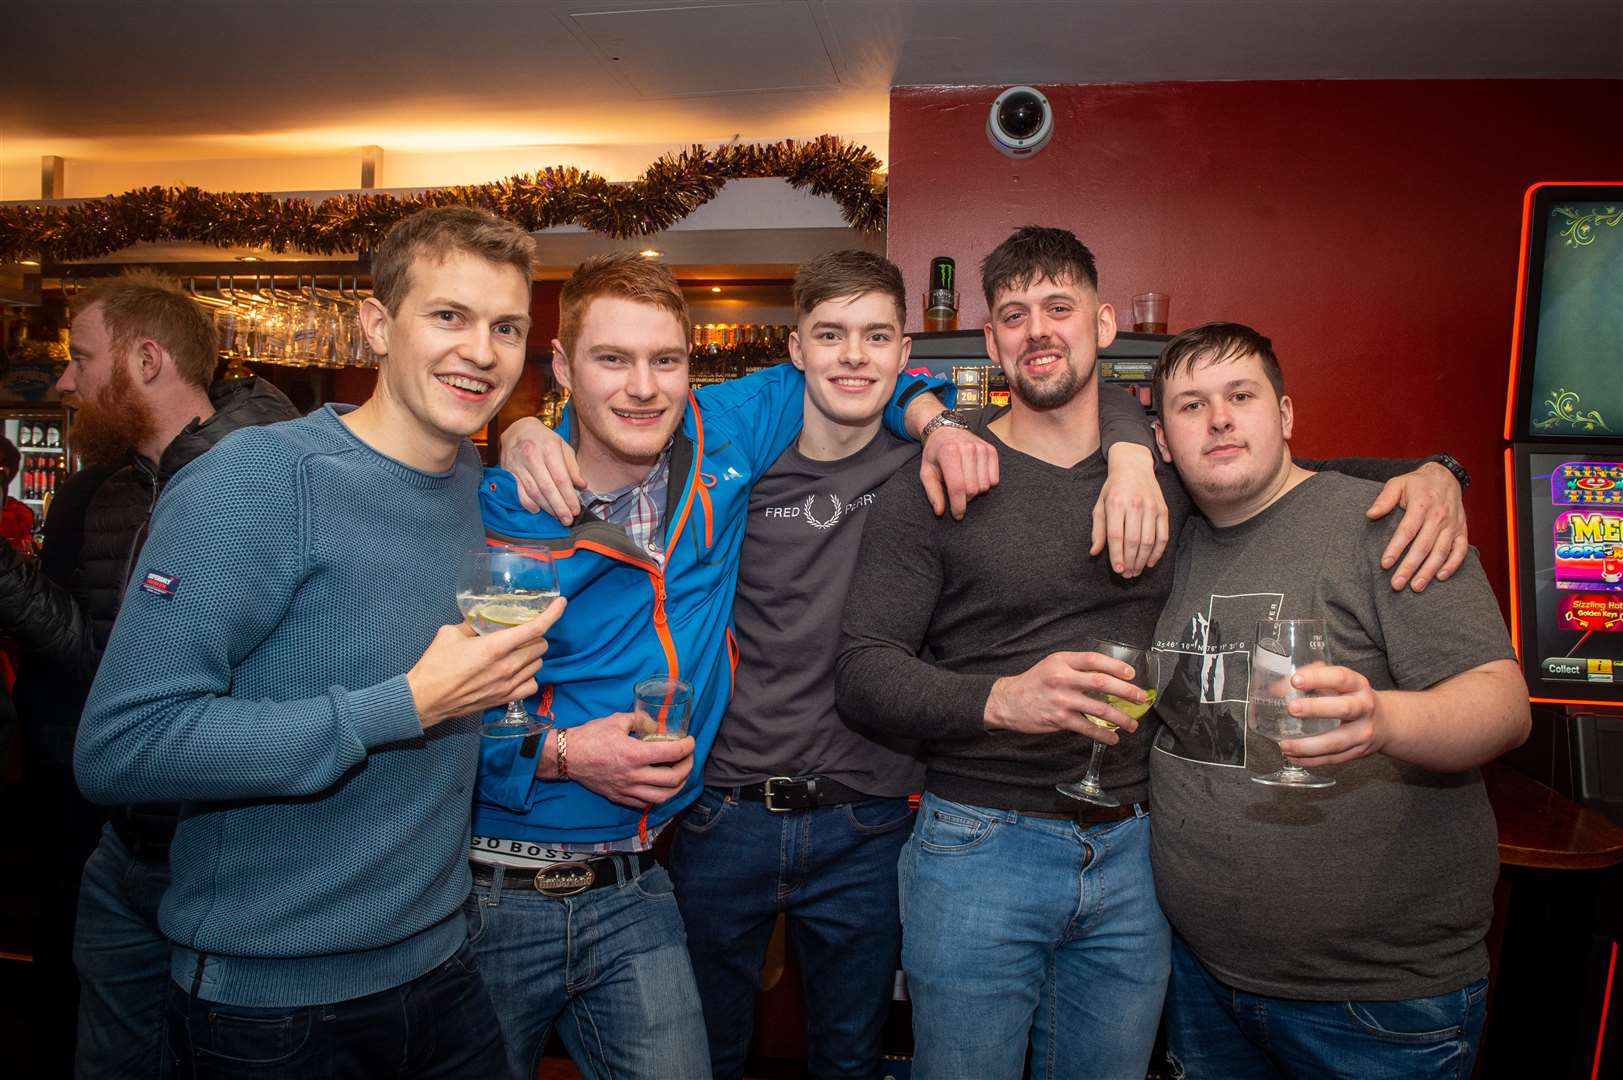 The lads from Ross-shire Engineering on night out.